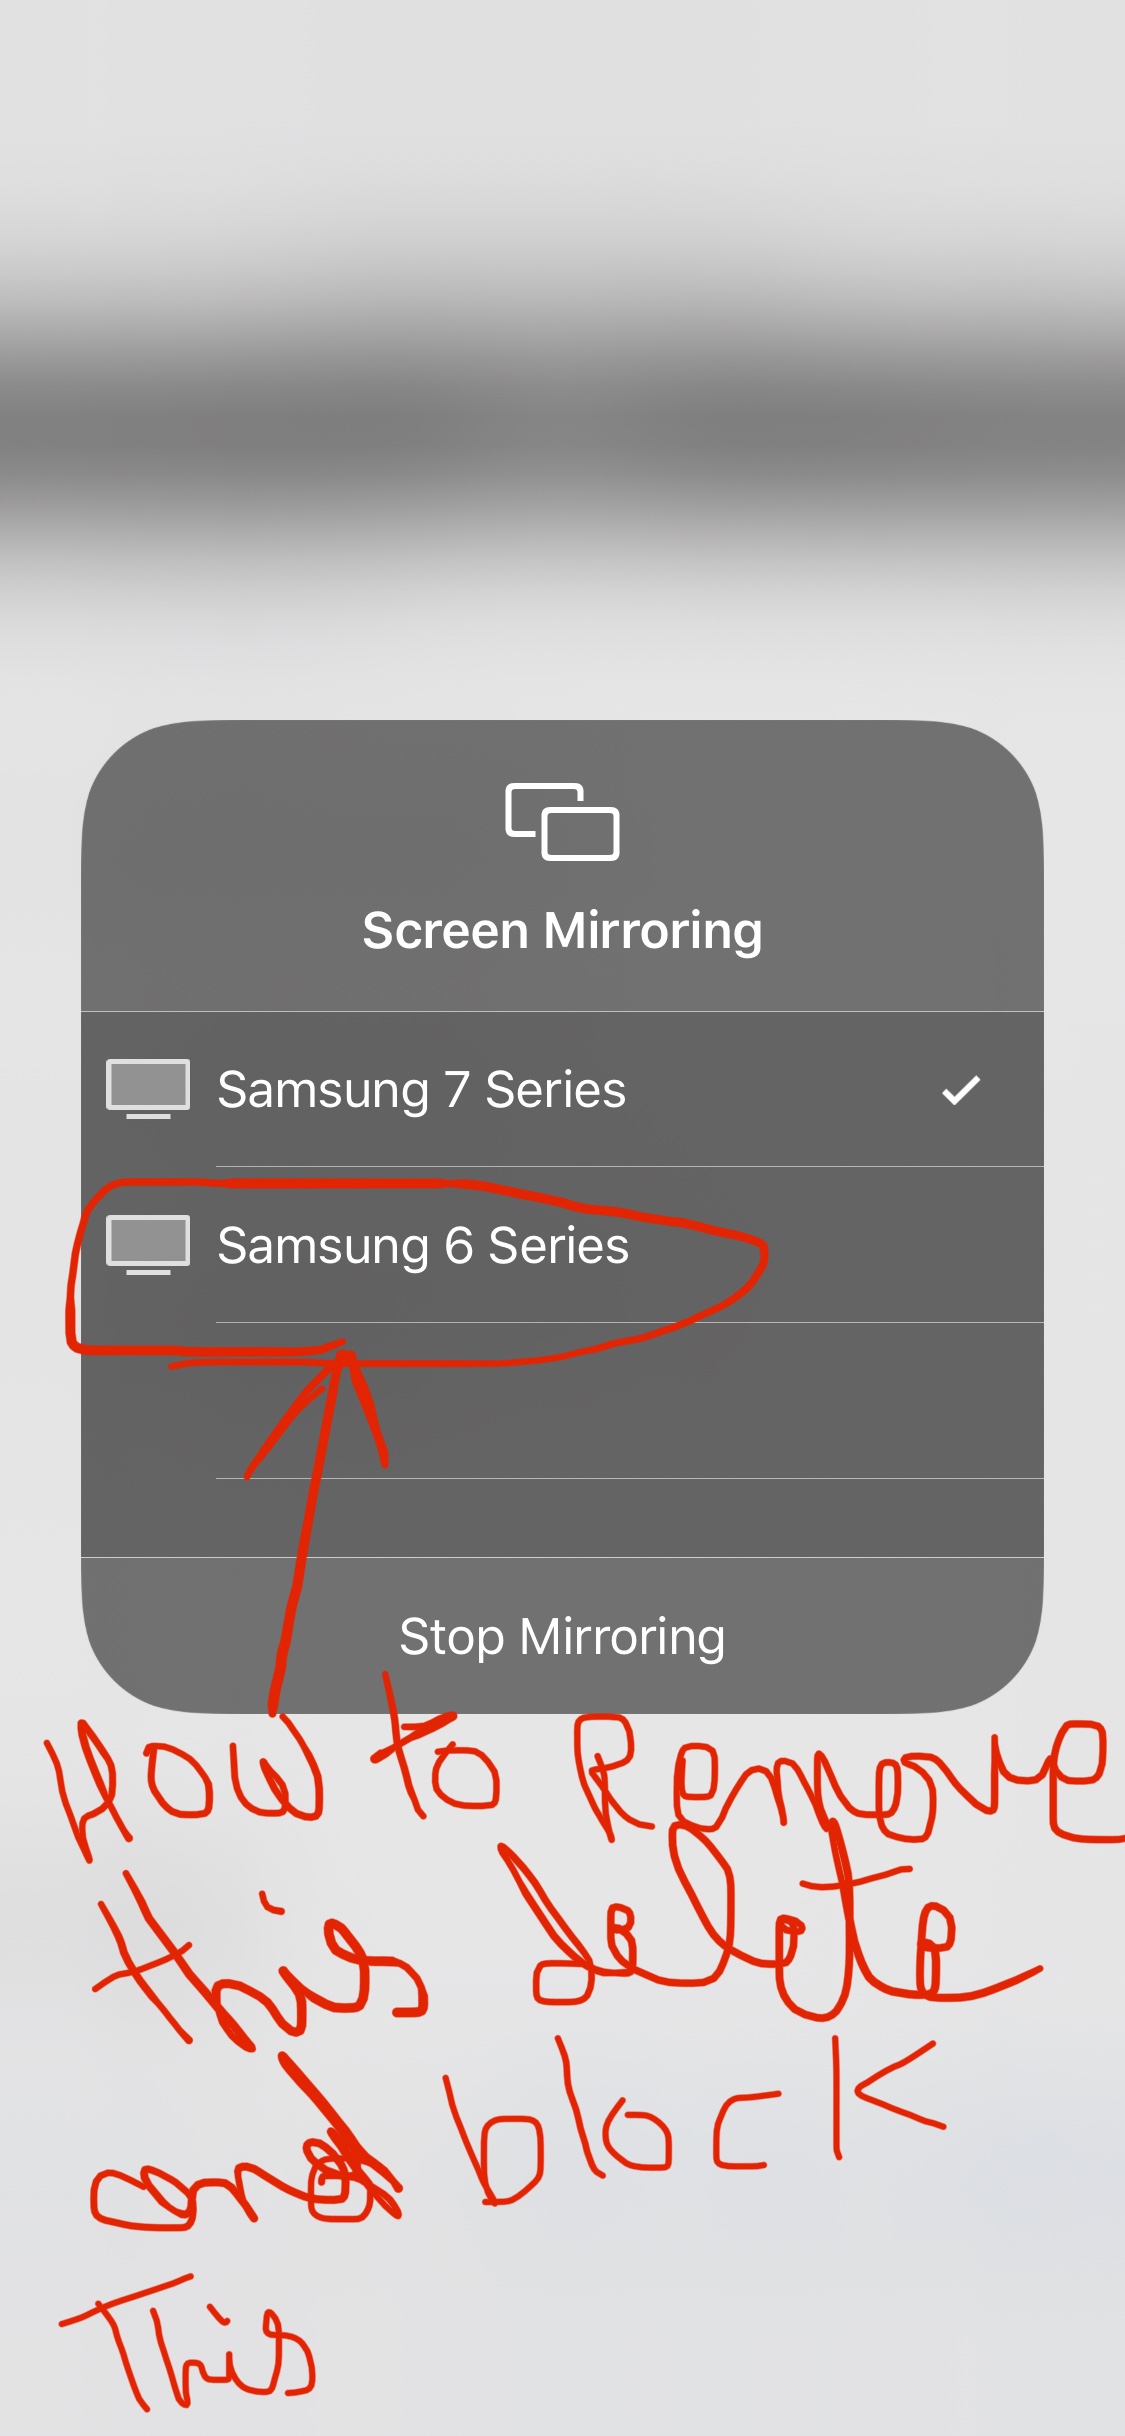 How To Remove Samsung Tv From Iphone, How Do I Disable Screen Mirroring On My Ipad